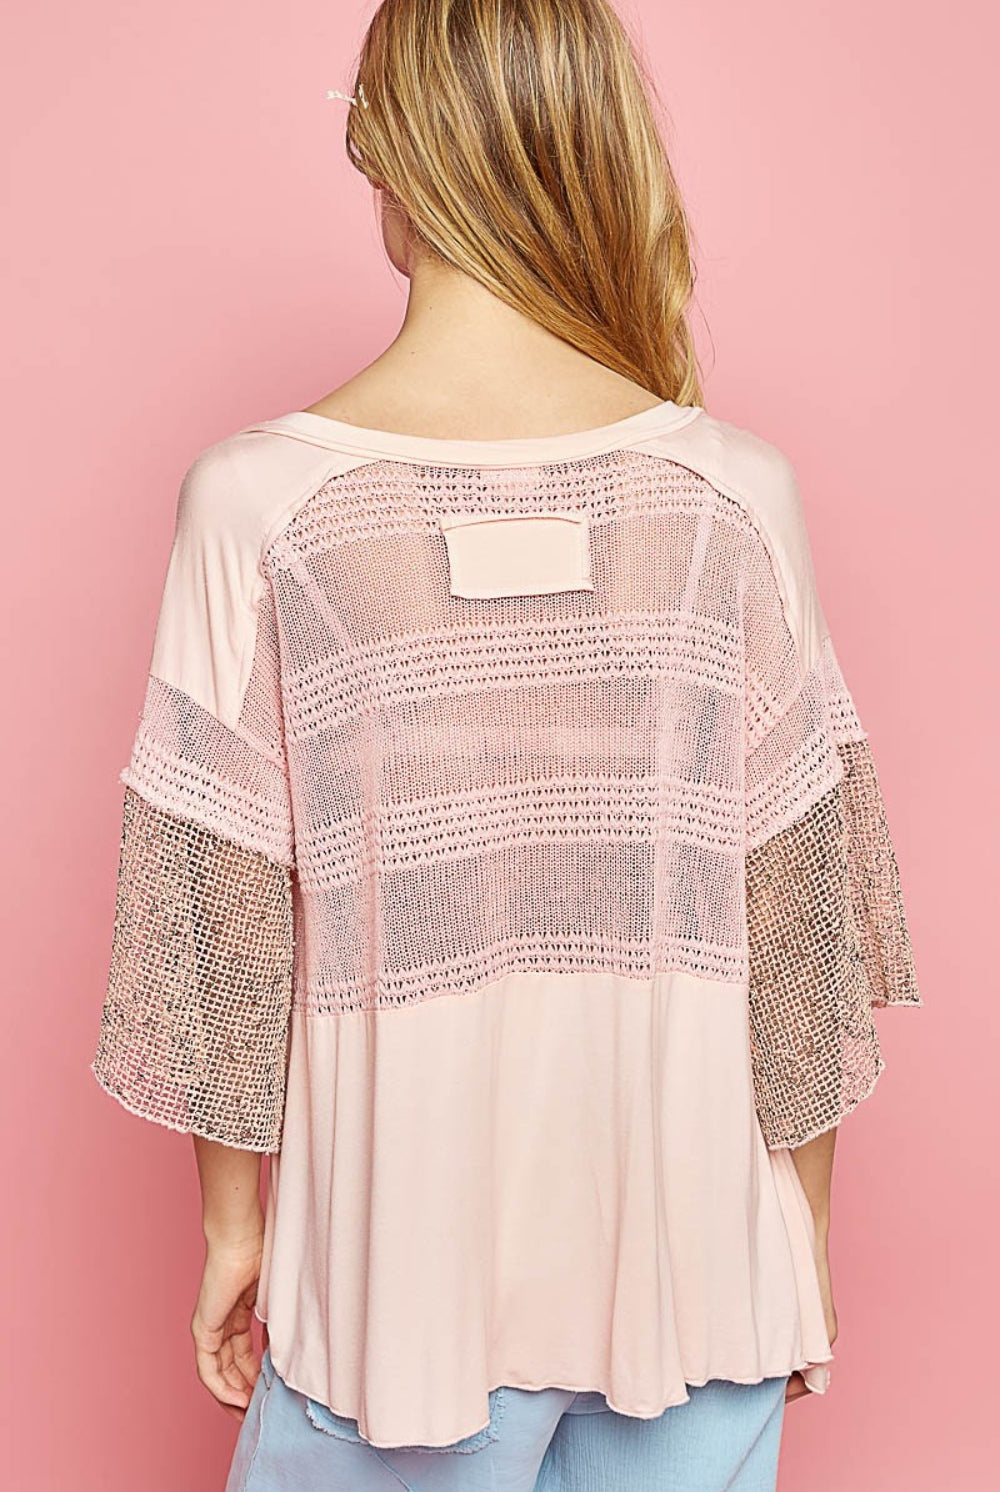 Fashion-forward woman in a blush pink short sleeve knit top with mesh accents